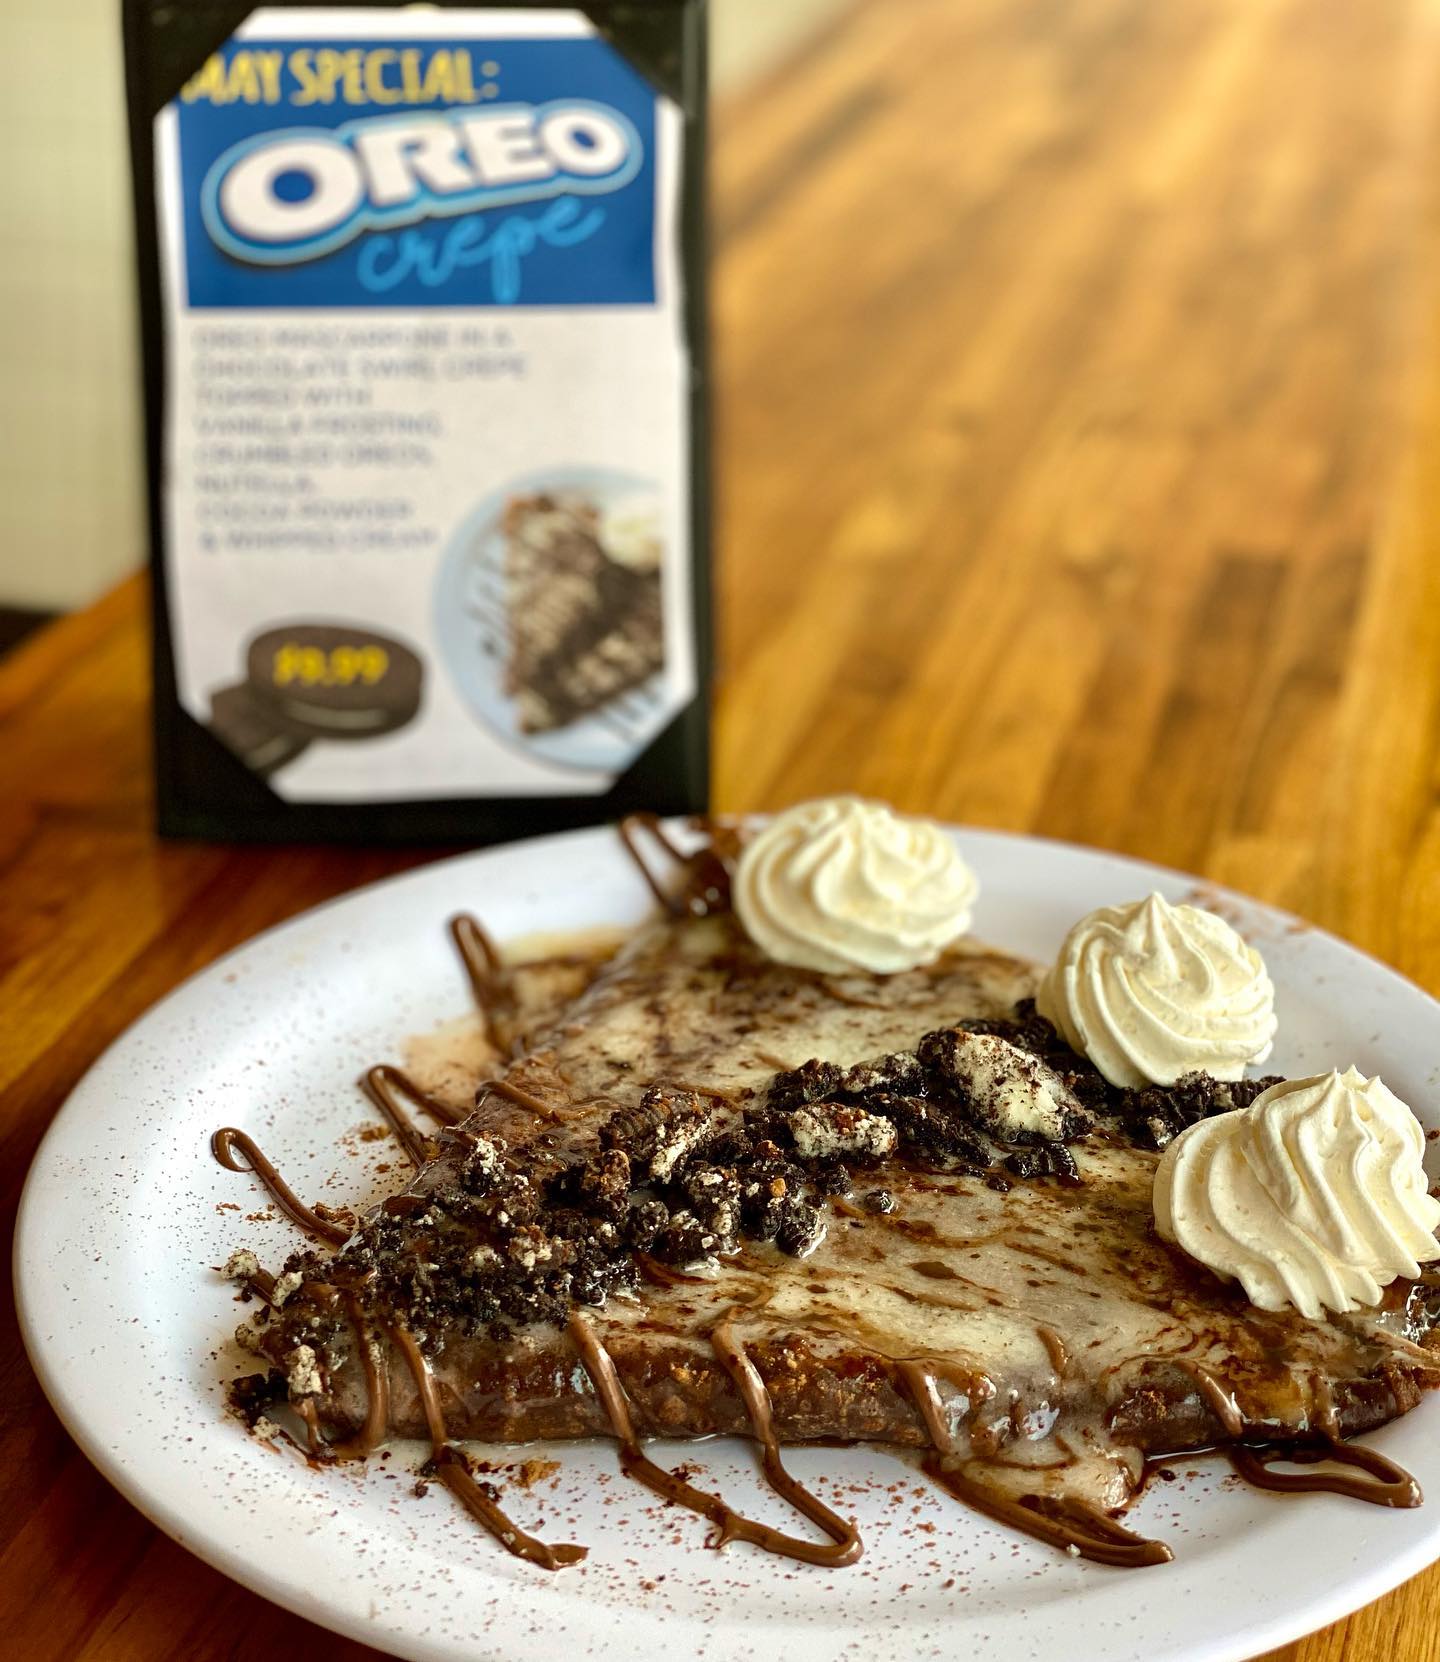 Oreo crepes from Crepe Crazy